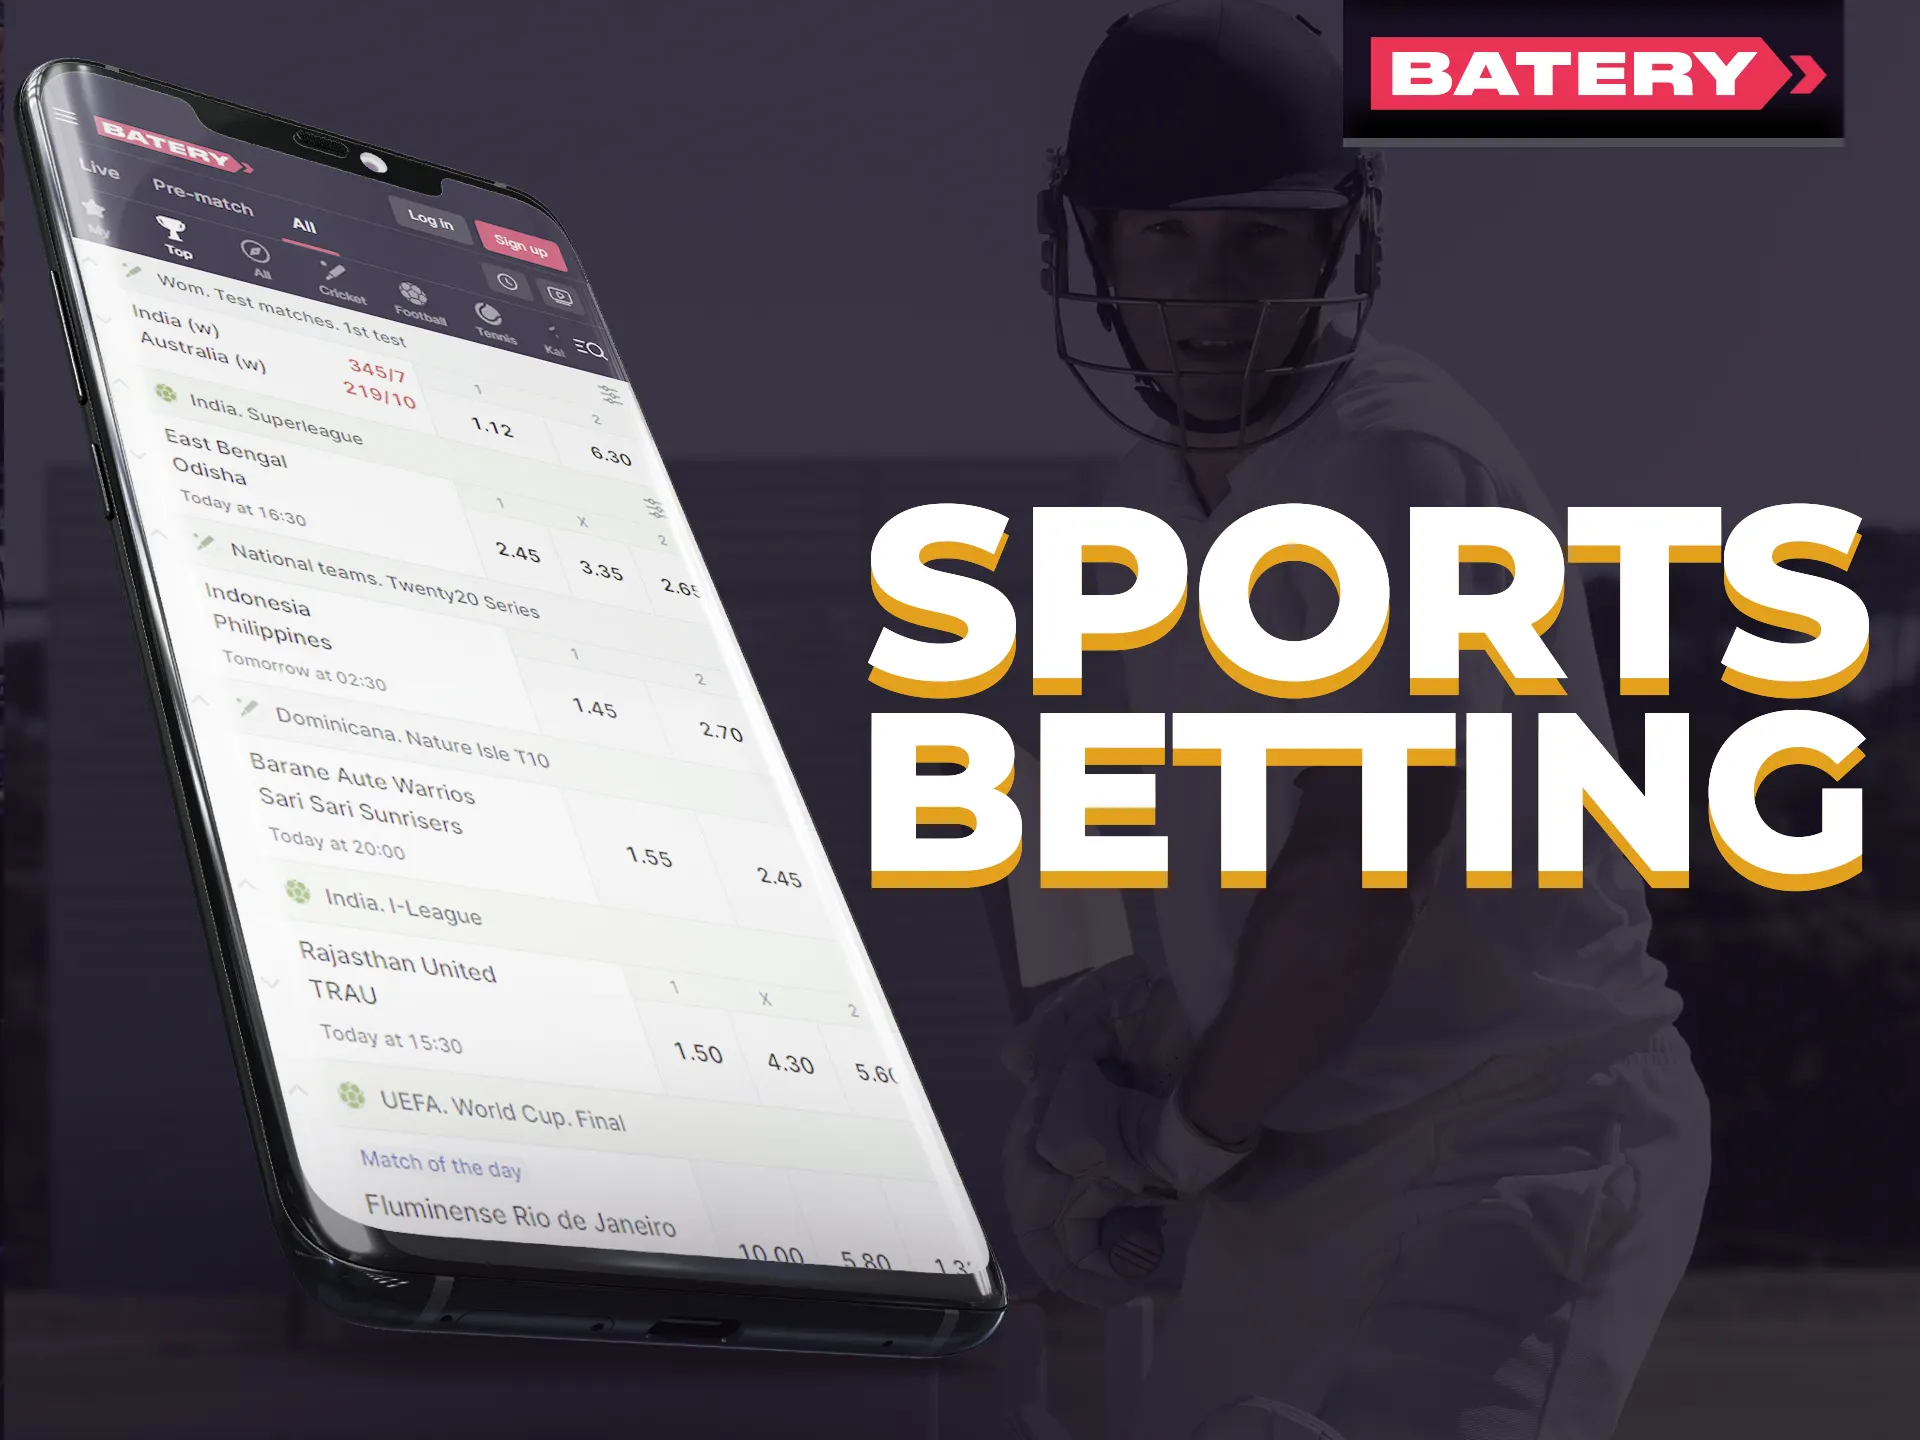 Batery App offers sports betting on 30+ sports, including cricket, with live options.